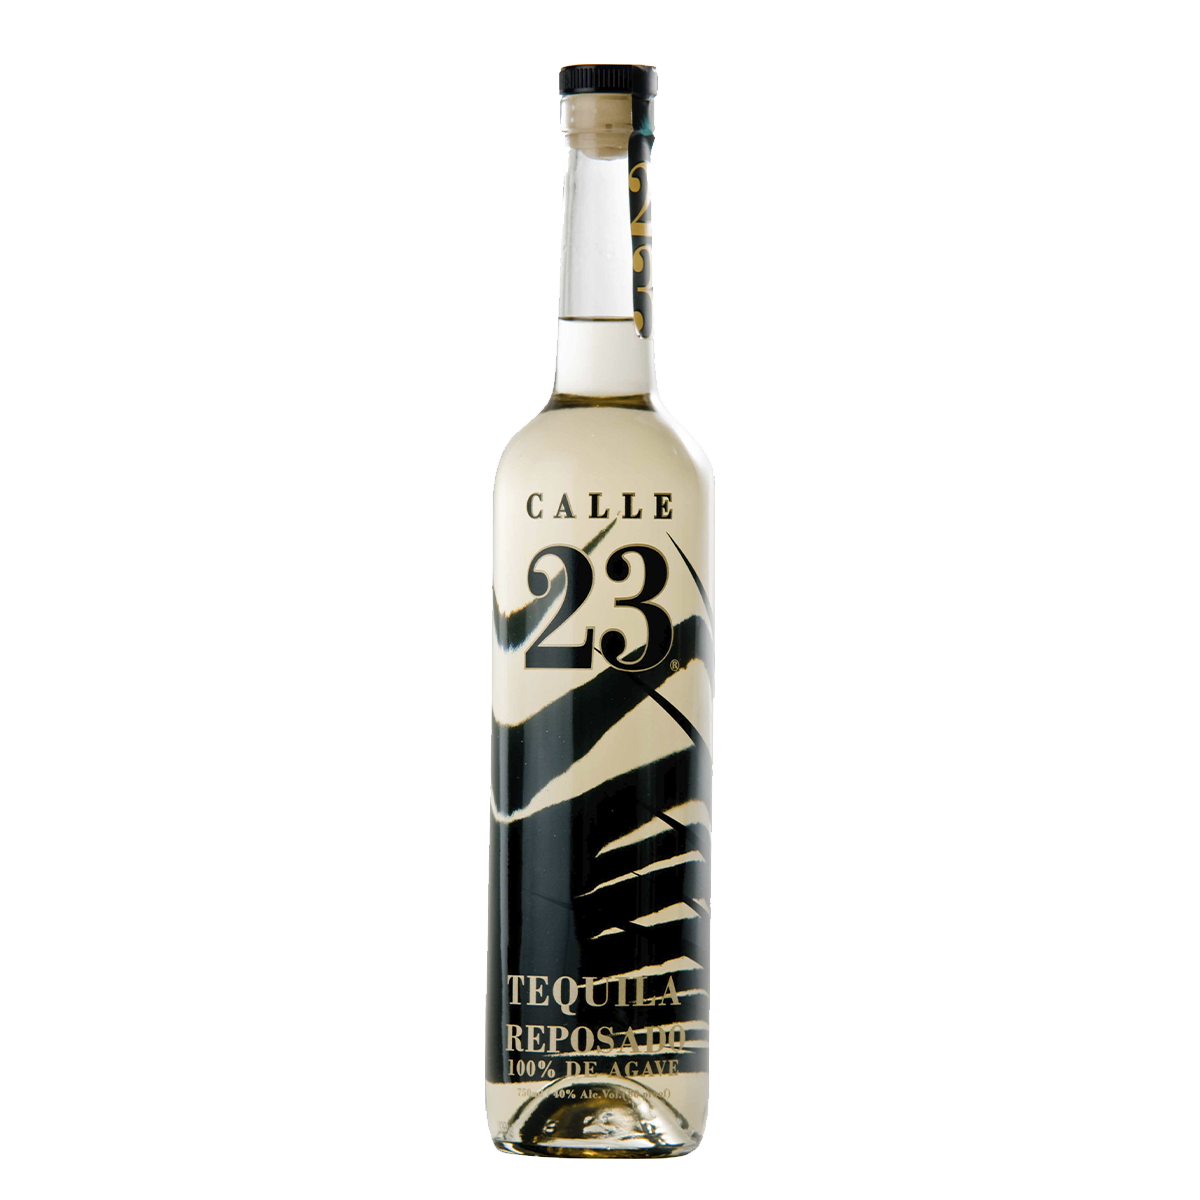 Calle 23 Reposado Tequila 100% Agave 750ml